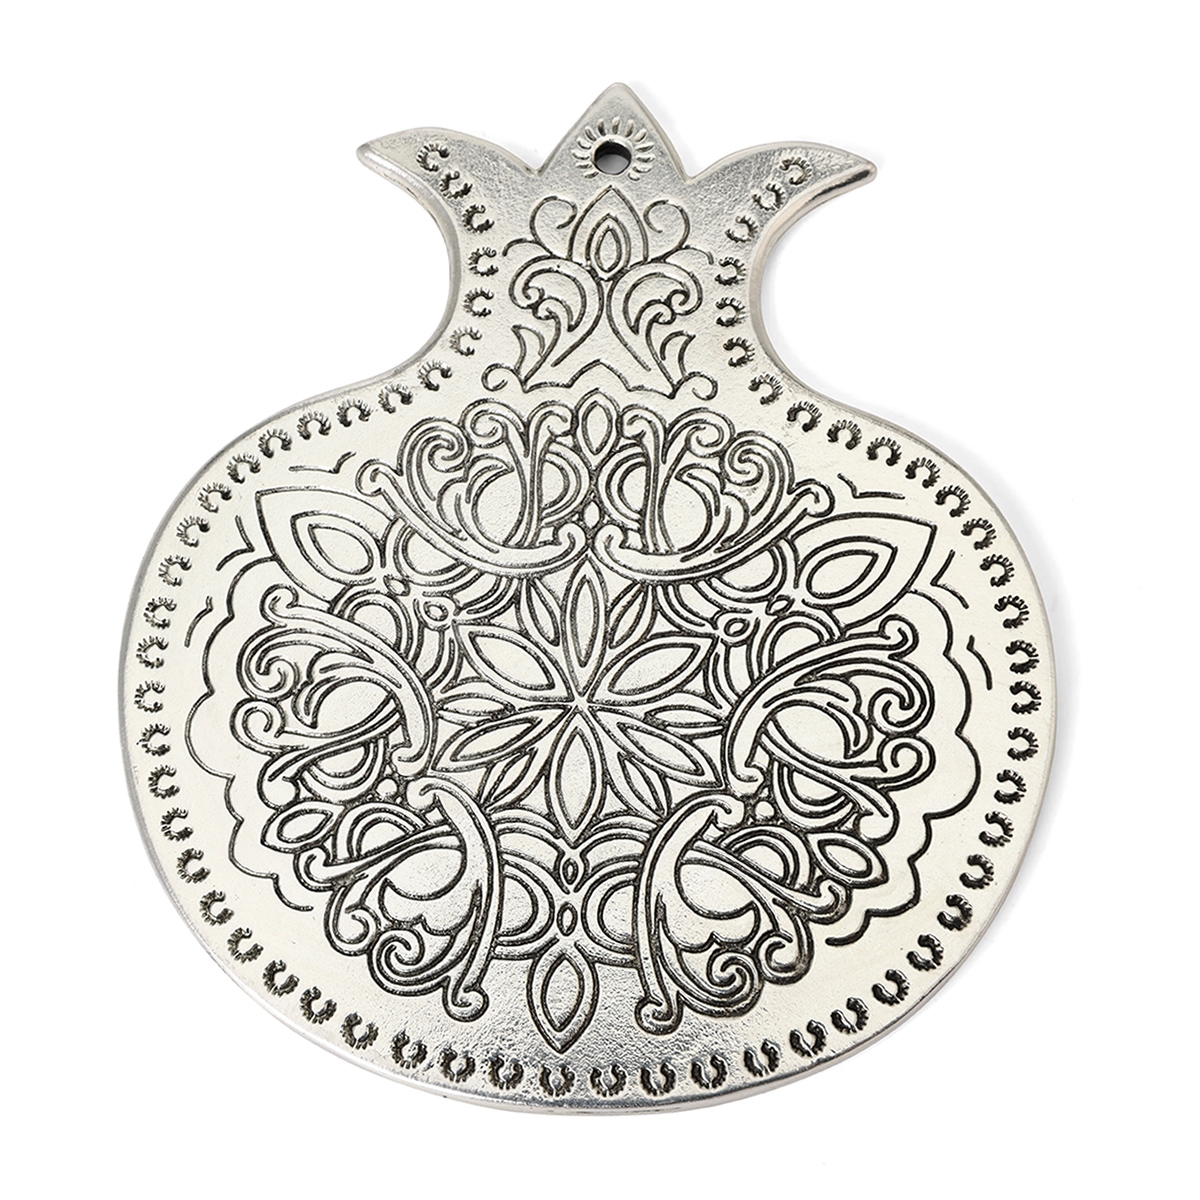  Silver-Plated Pomegranate Amulet Wall Hanging - Israel Museum Collection - 1